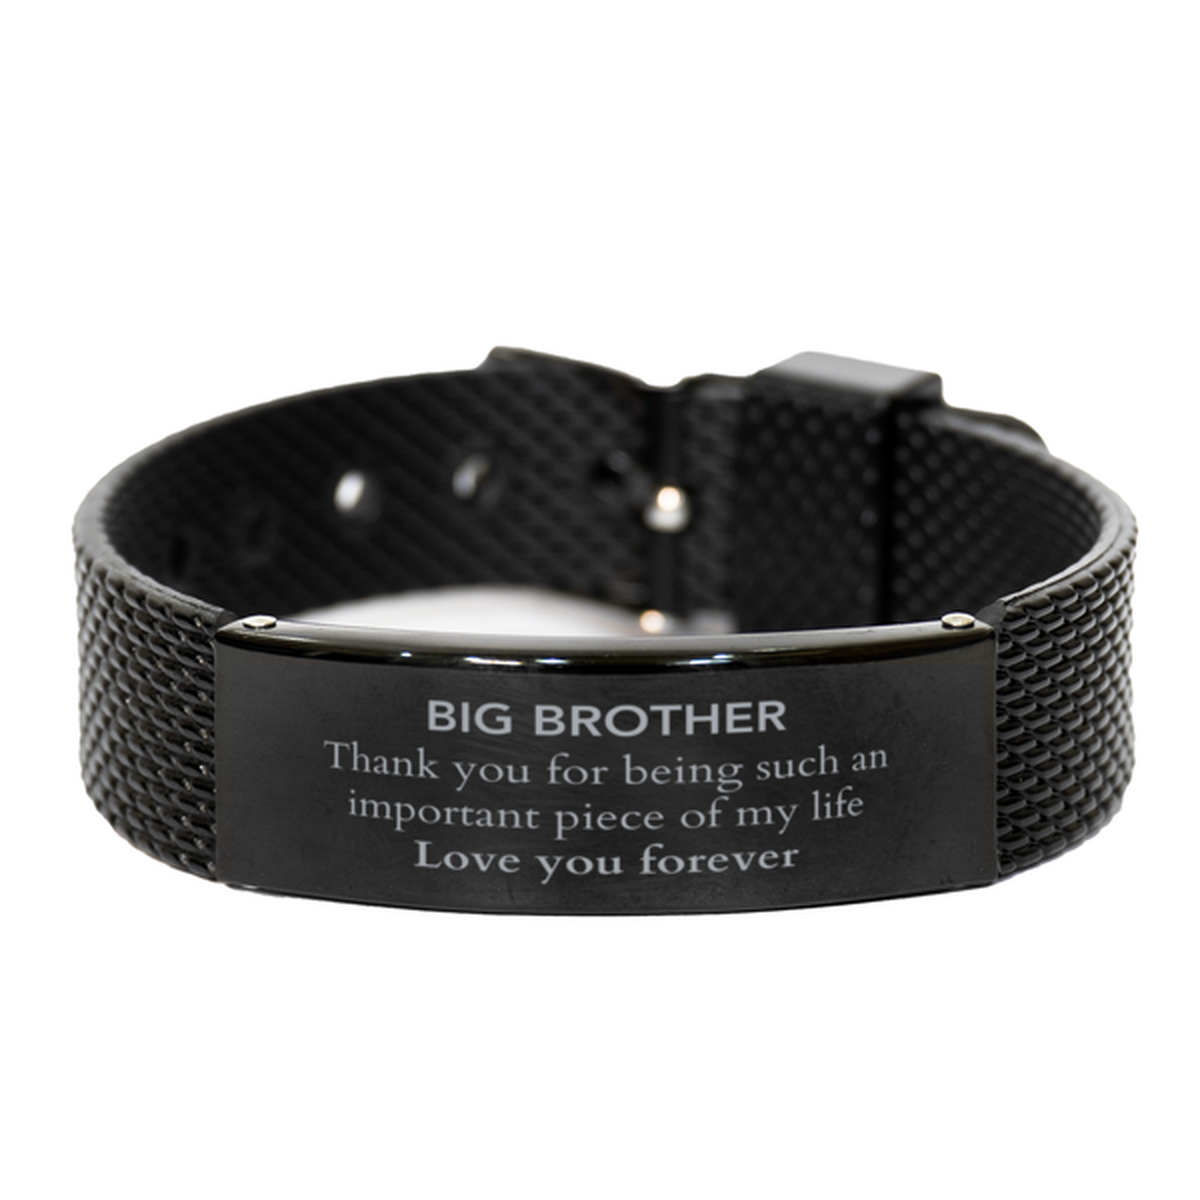 Appropriate Big Brother Black Shark Mesh Bracelet Epic Birthday Gifts for Big Brother Thank you for being such an important piece of my life Big Brother Christmas Mothers Fathers Day